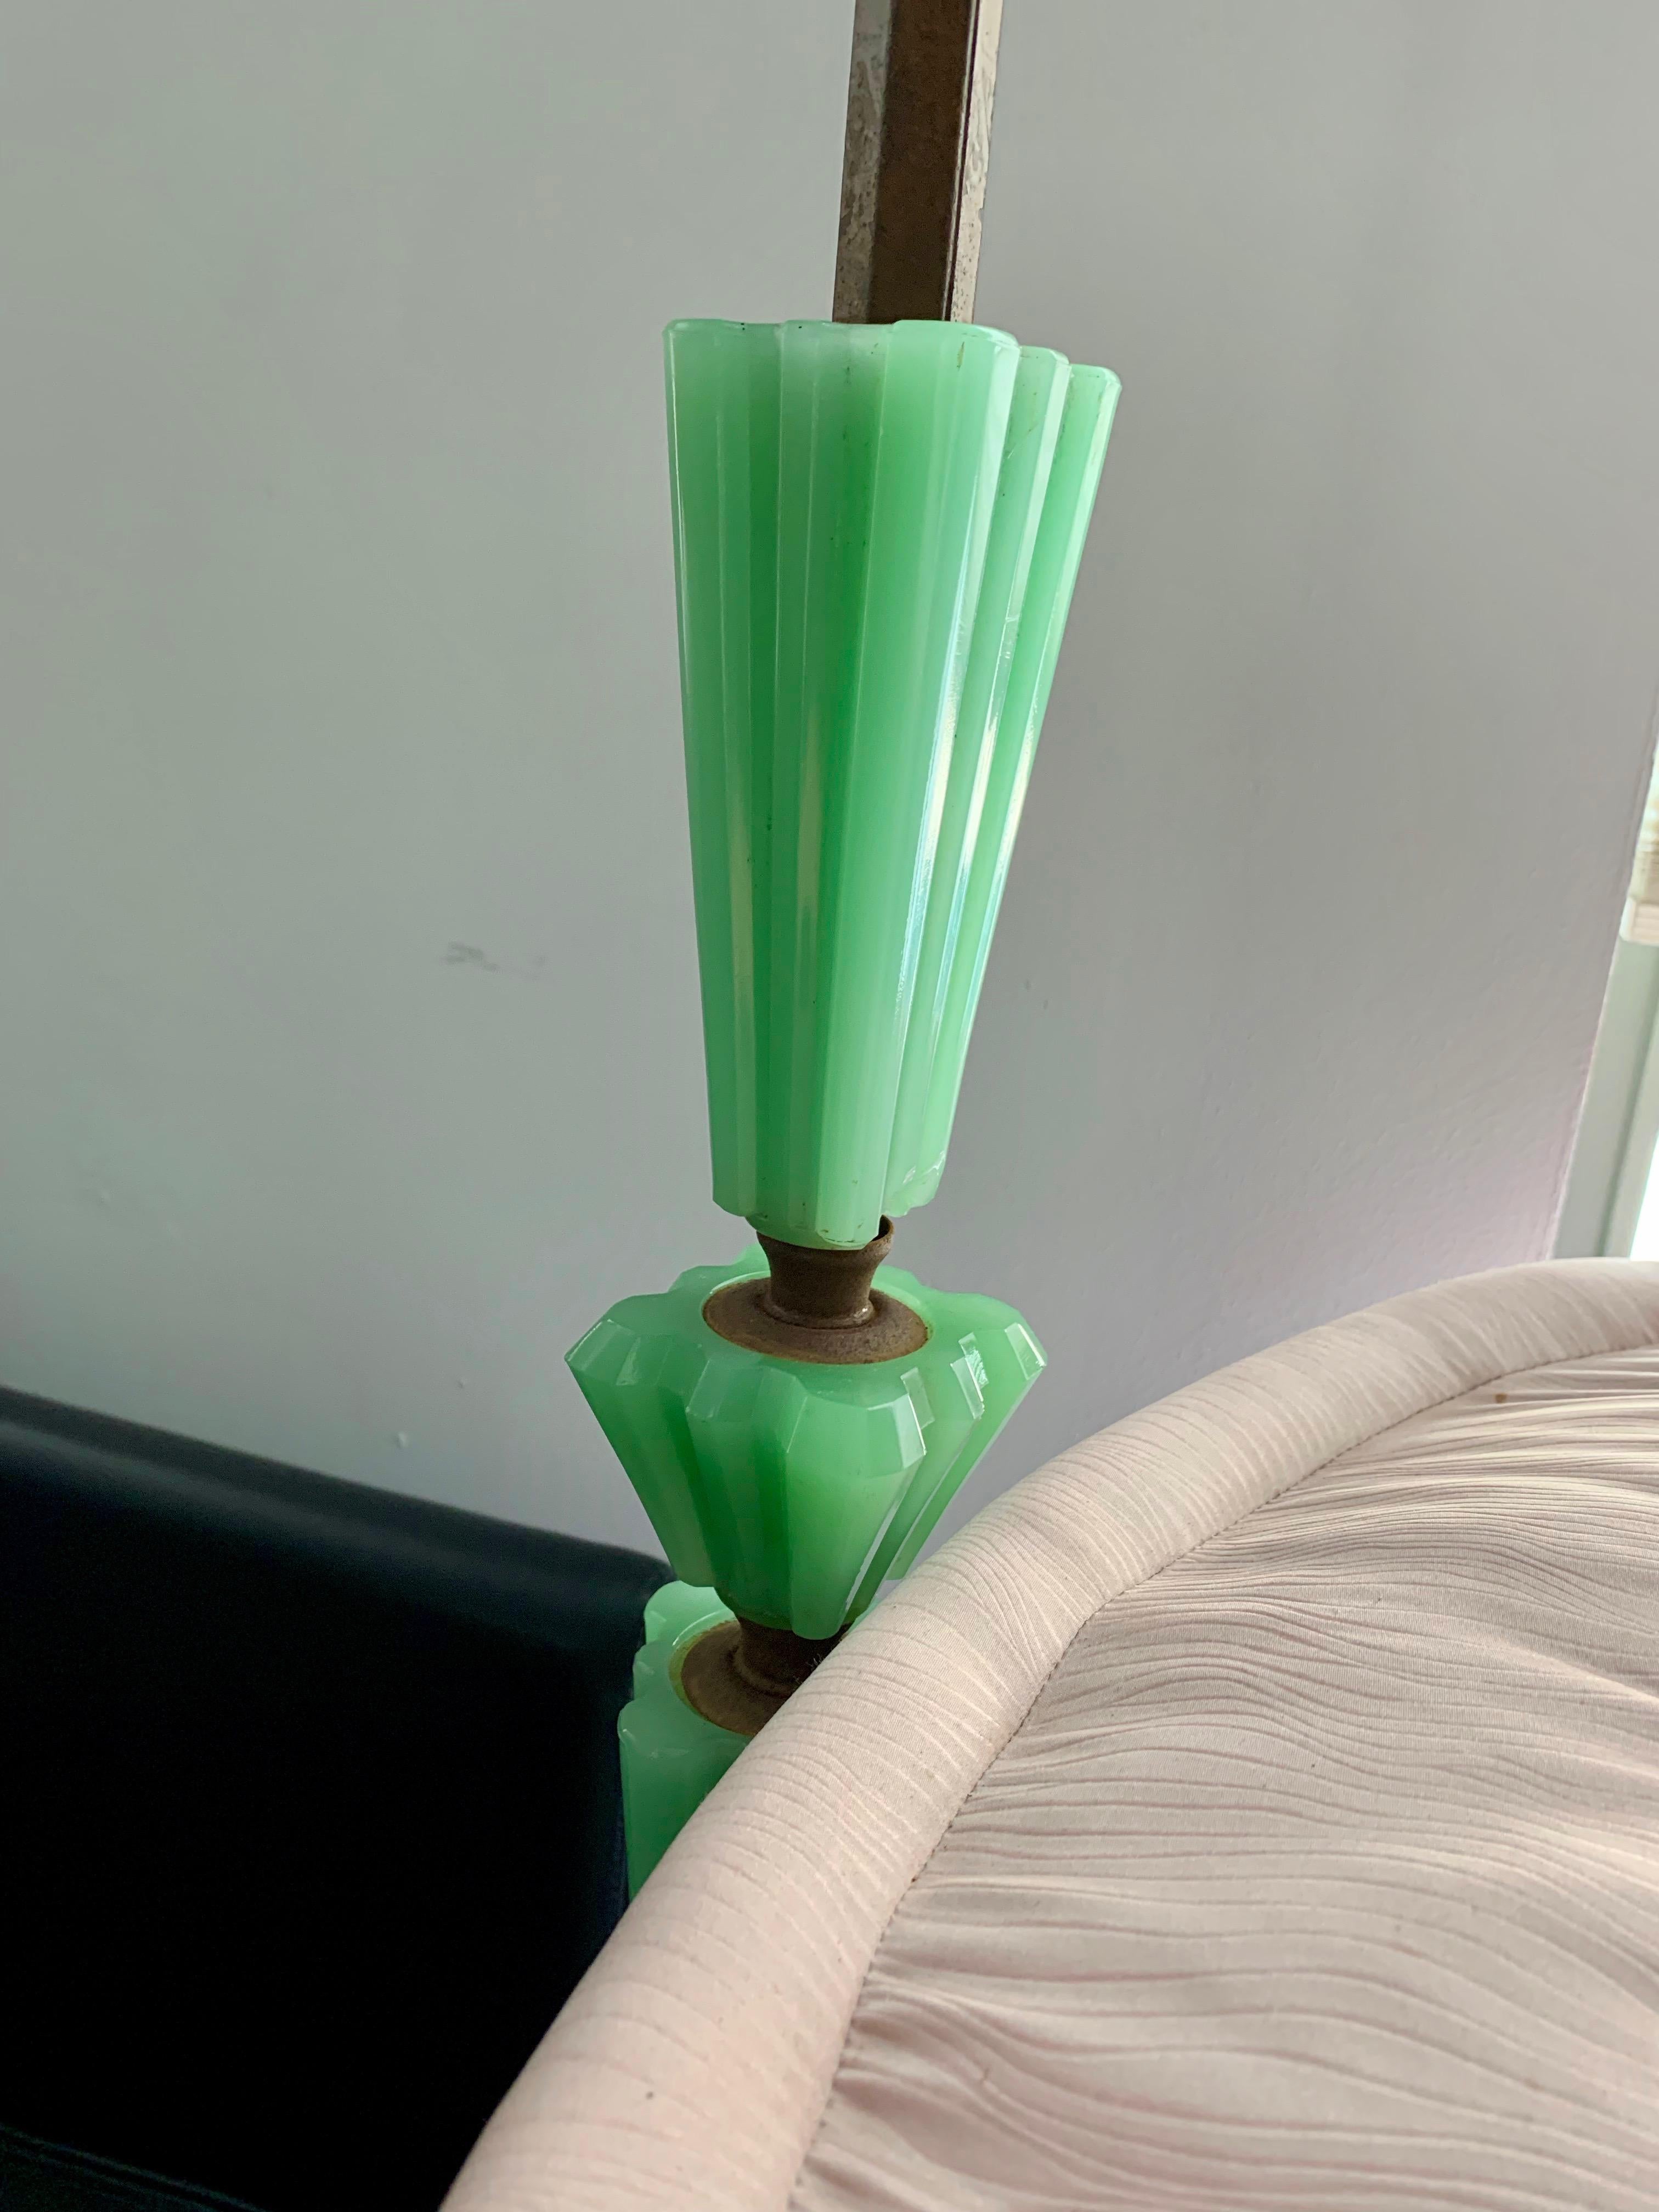 Art Deco Green Jadite and metal floor bridge lamp. Good color. Dimensions: H 60 inches, W 13 inches, D 10 inches.
 